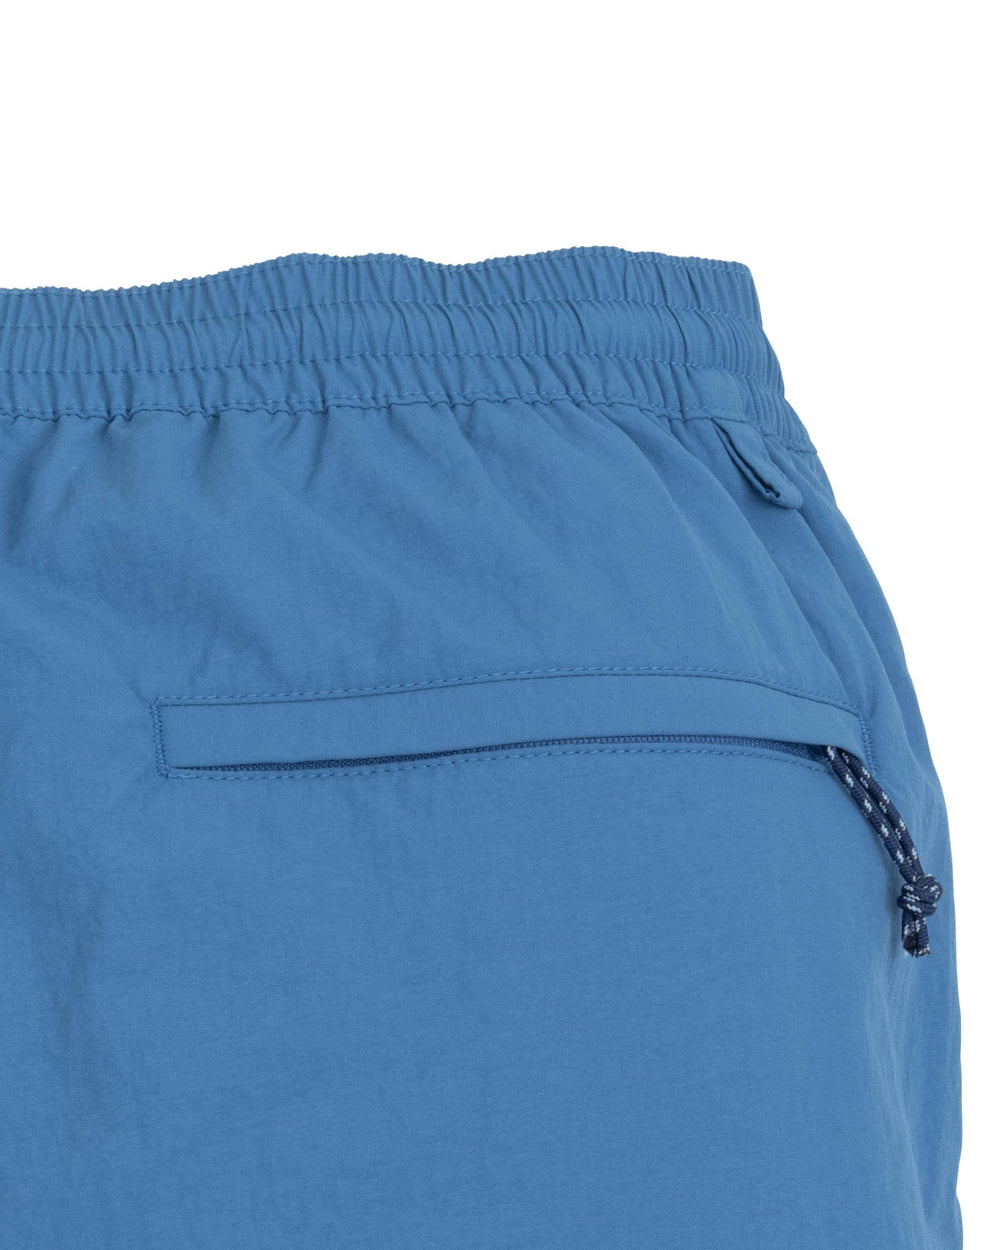 The detail view of the Southern Tide Shoreline 6 Inch Short by Southern Tide - Atlantic Blue